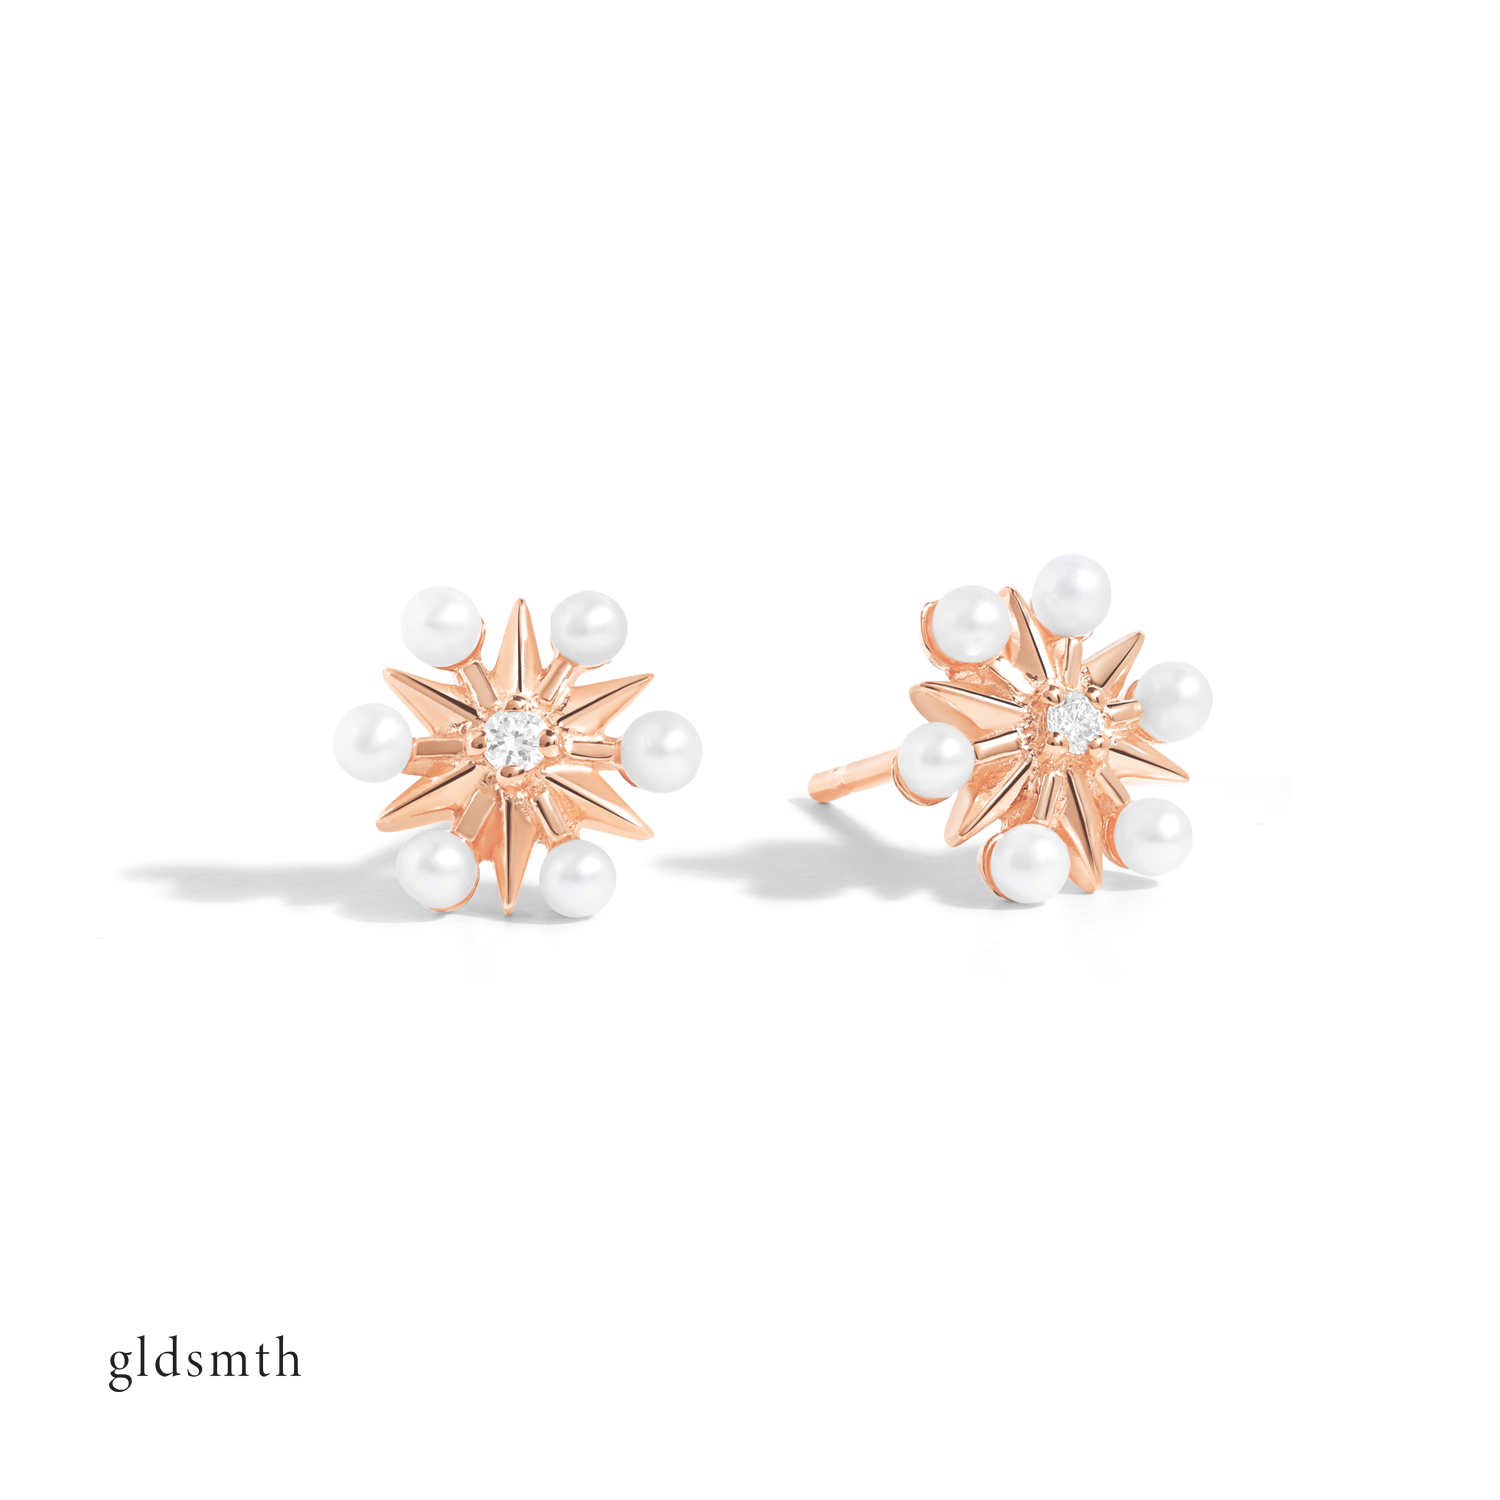 Dainty and fine earrings. Handcrafted 10k solid rose gold studs with conflict-free diamonds and freshwater pearls.